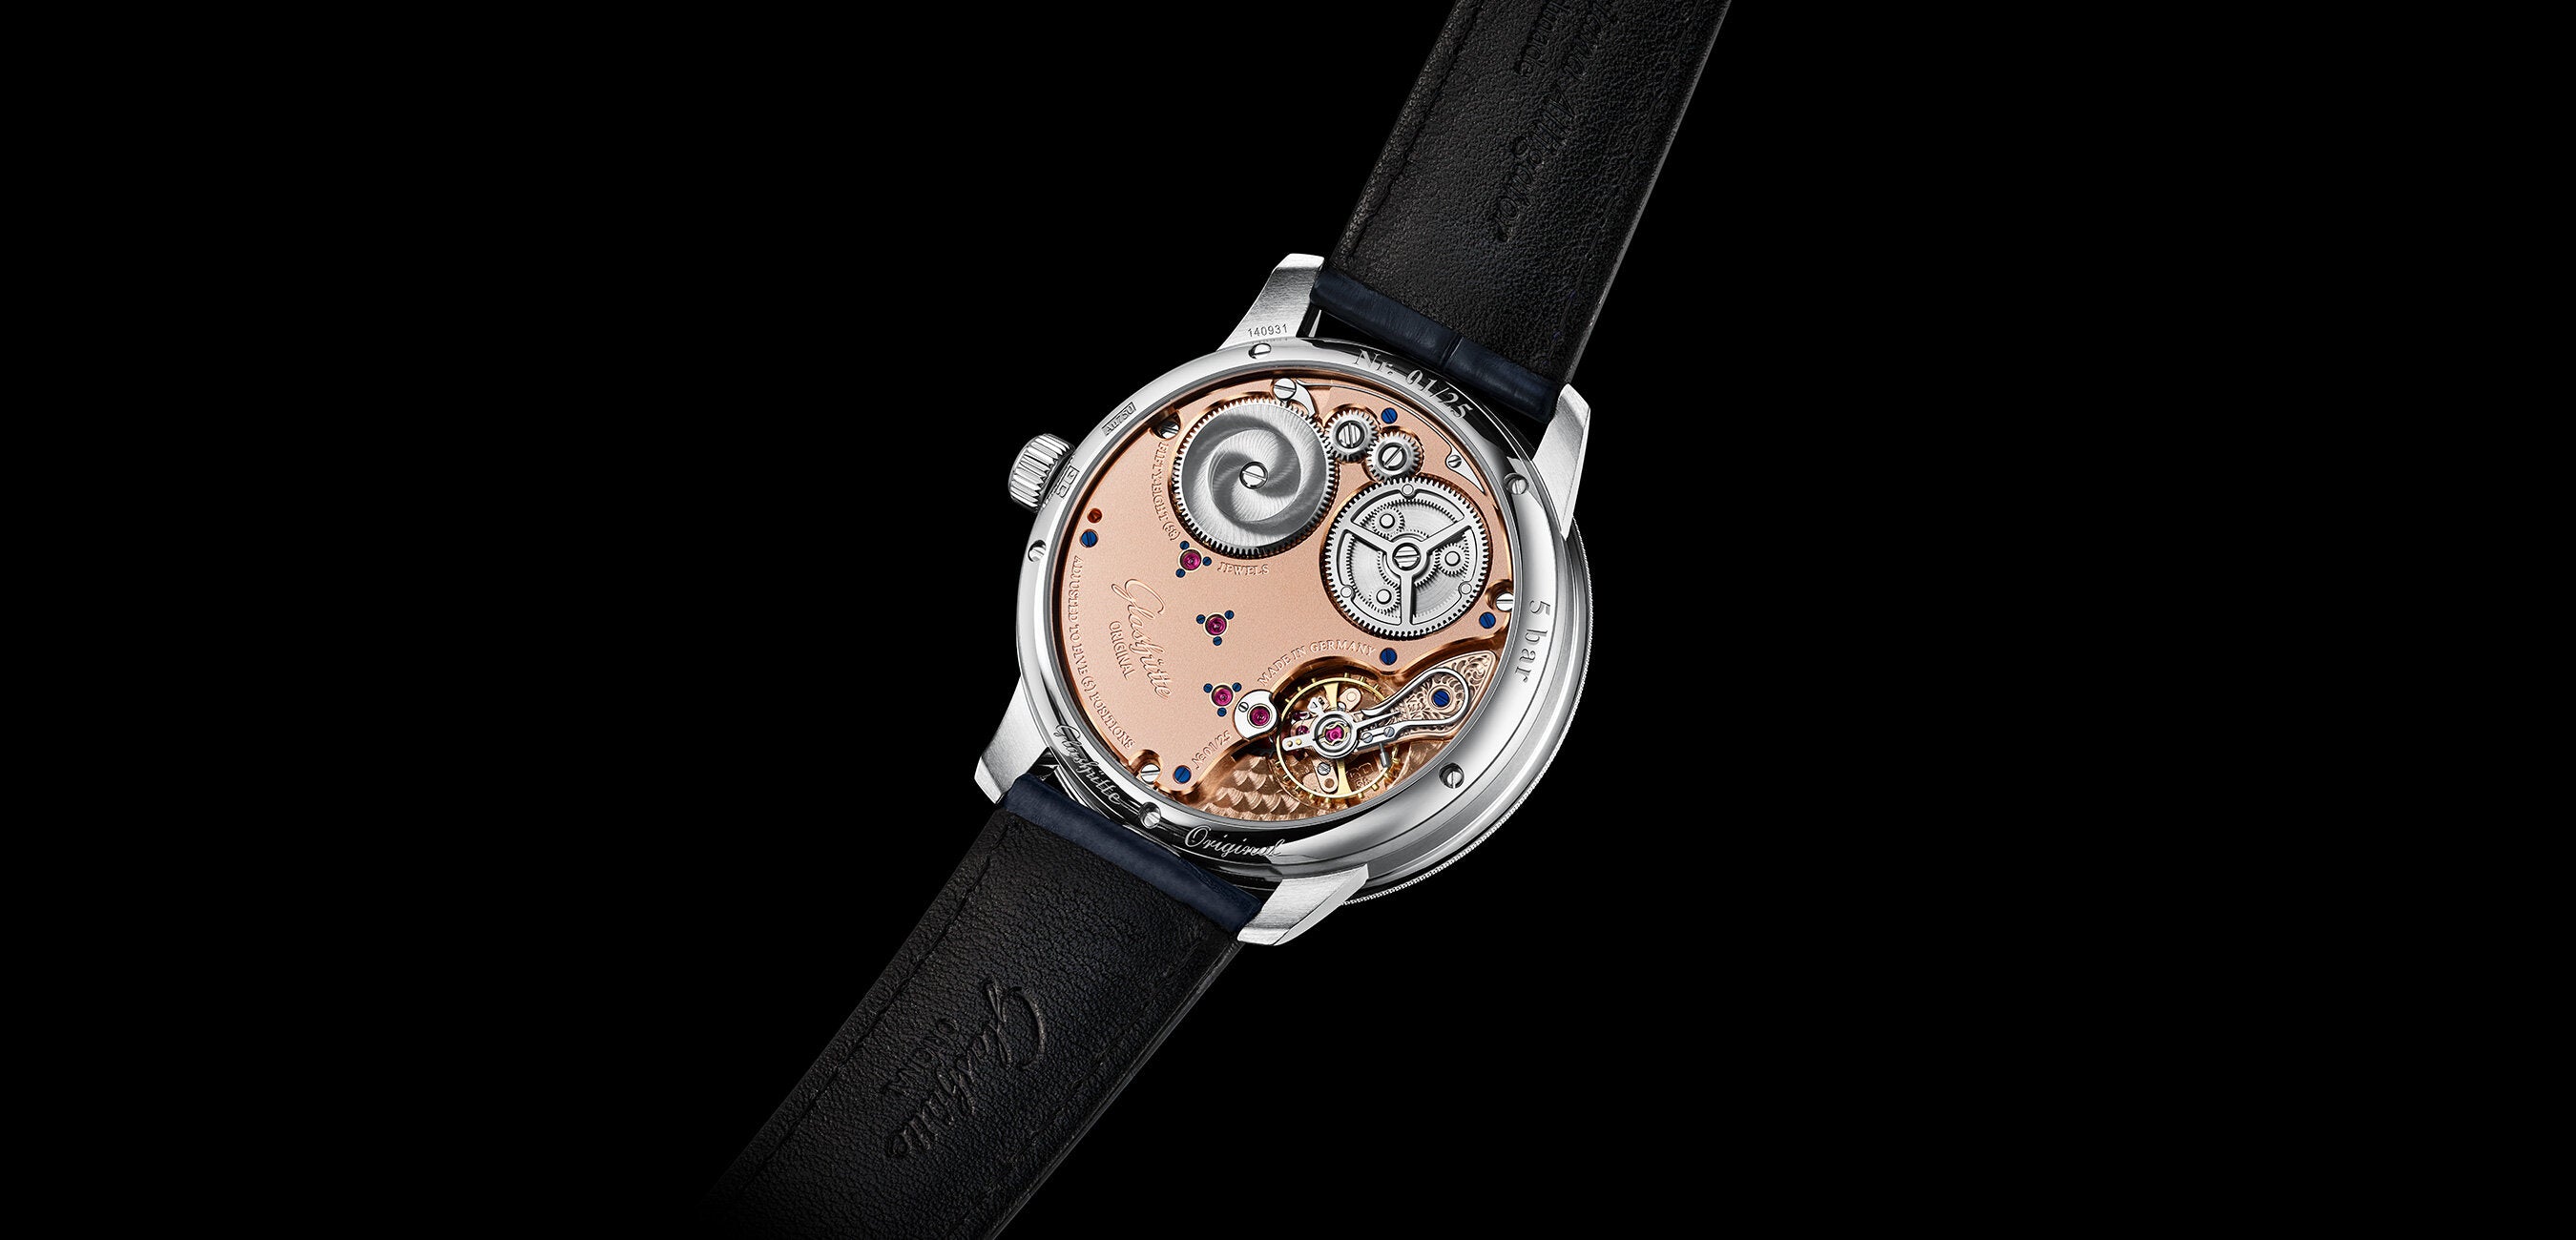 For connoisseurs of the fine art of German watchmaking